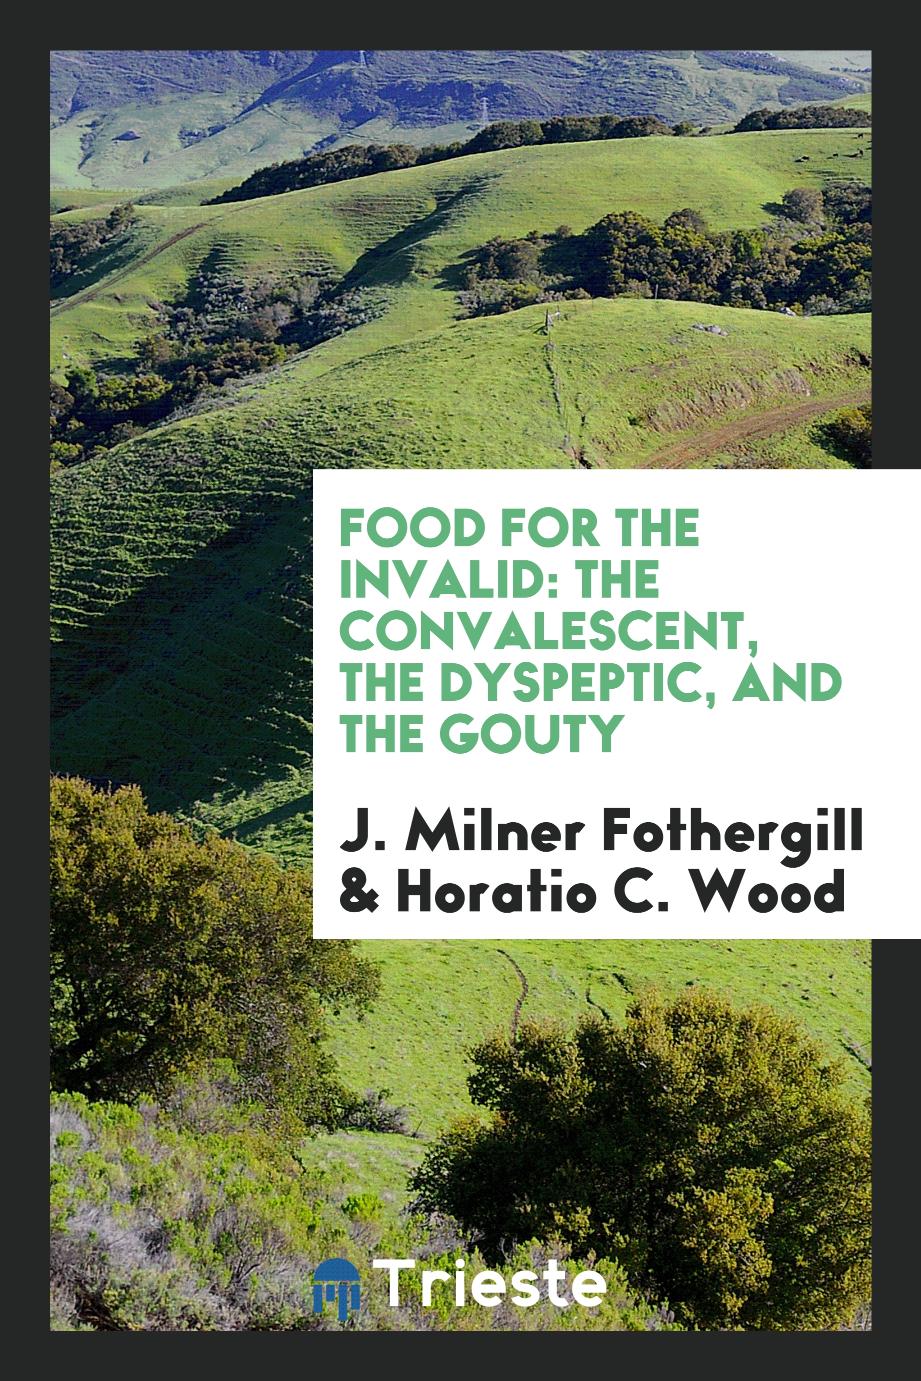 Food for the Invalid: The Convalescent, the Dyspeptic, and the Gouty